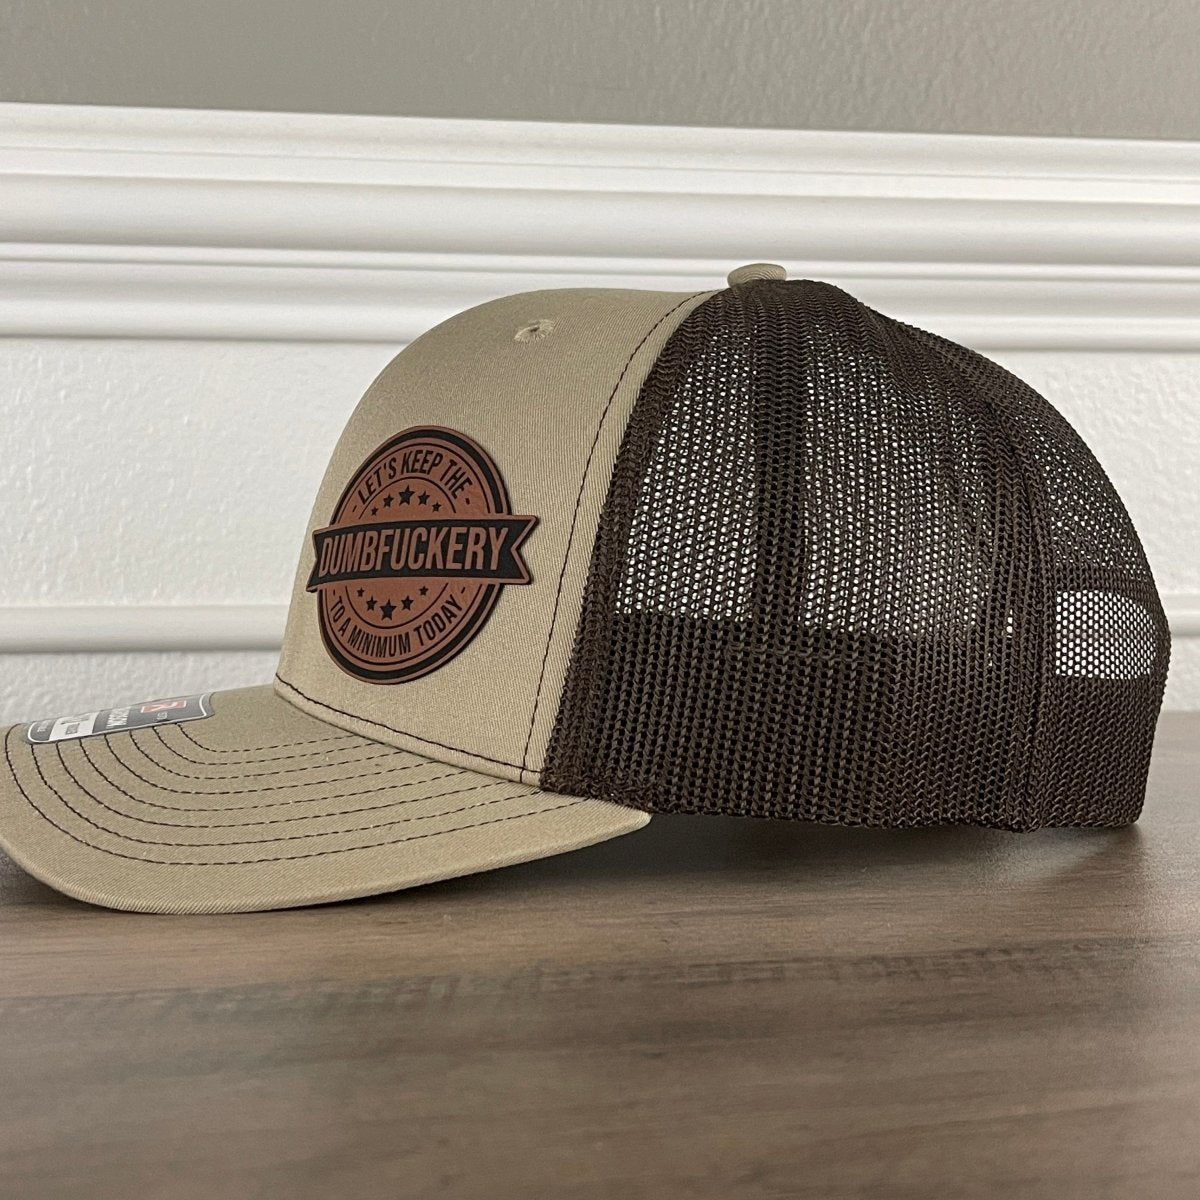 Let's Keep The Dumbfckery To A Minimum Today Funny Leather Patch Hat Khaki/Brown Patch Hat - VividEditions